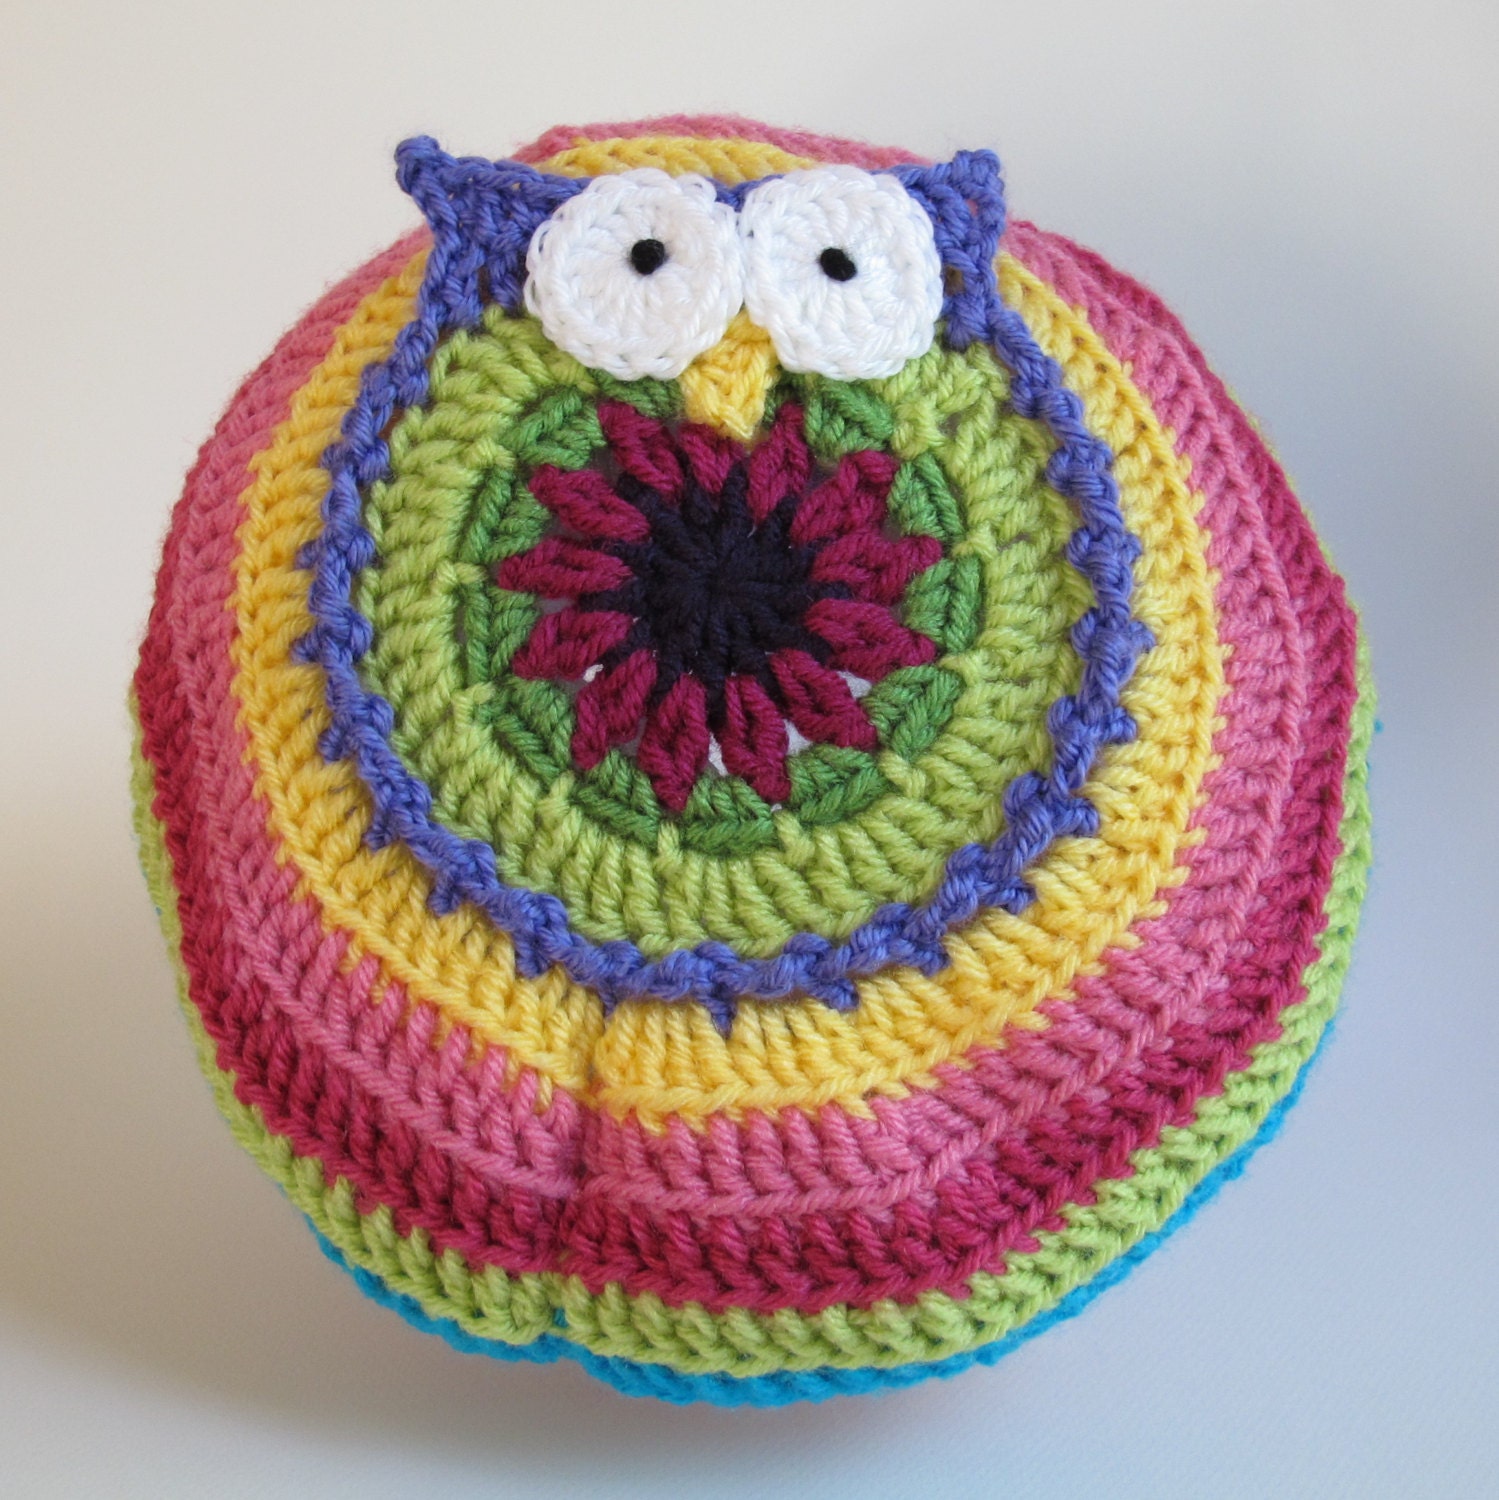 Crochet Pattern - B HOO UR Hat - a colorful slouch owl hat with visor and buttons in 5 sizes (Toddler - Adult L) - Instant PDF Download